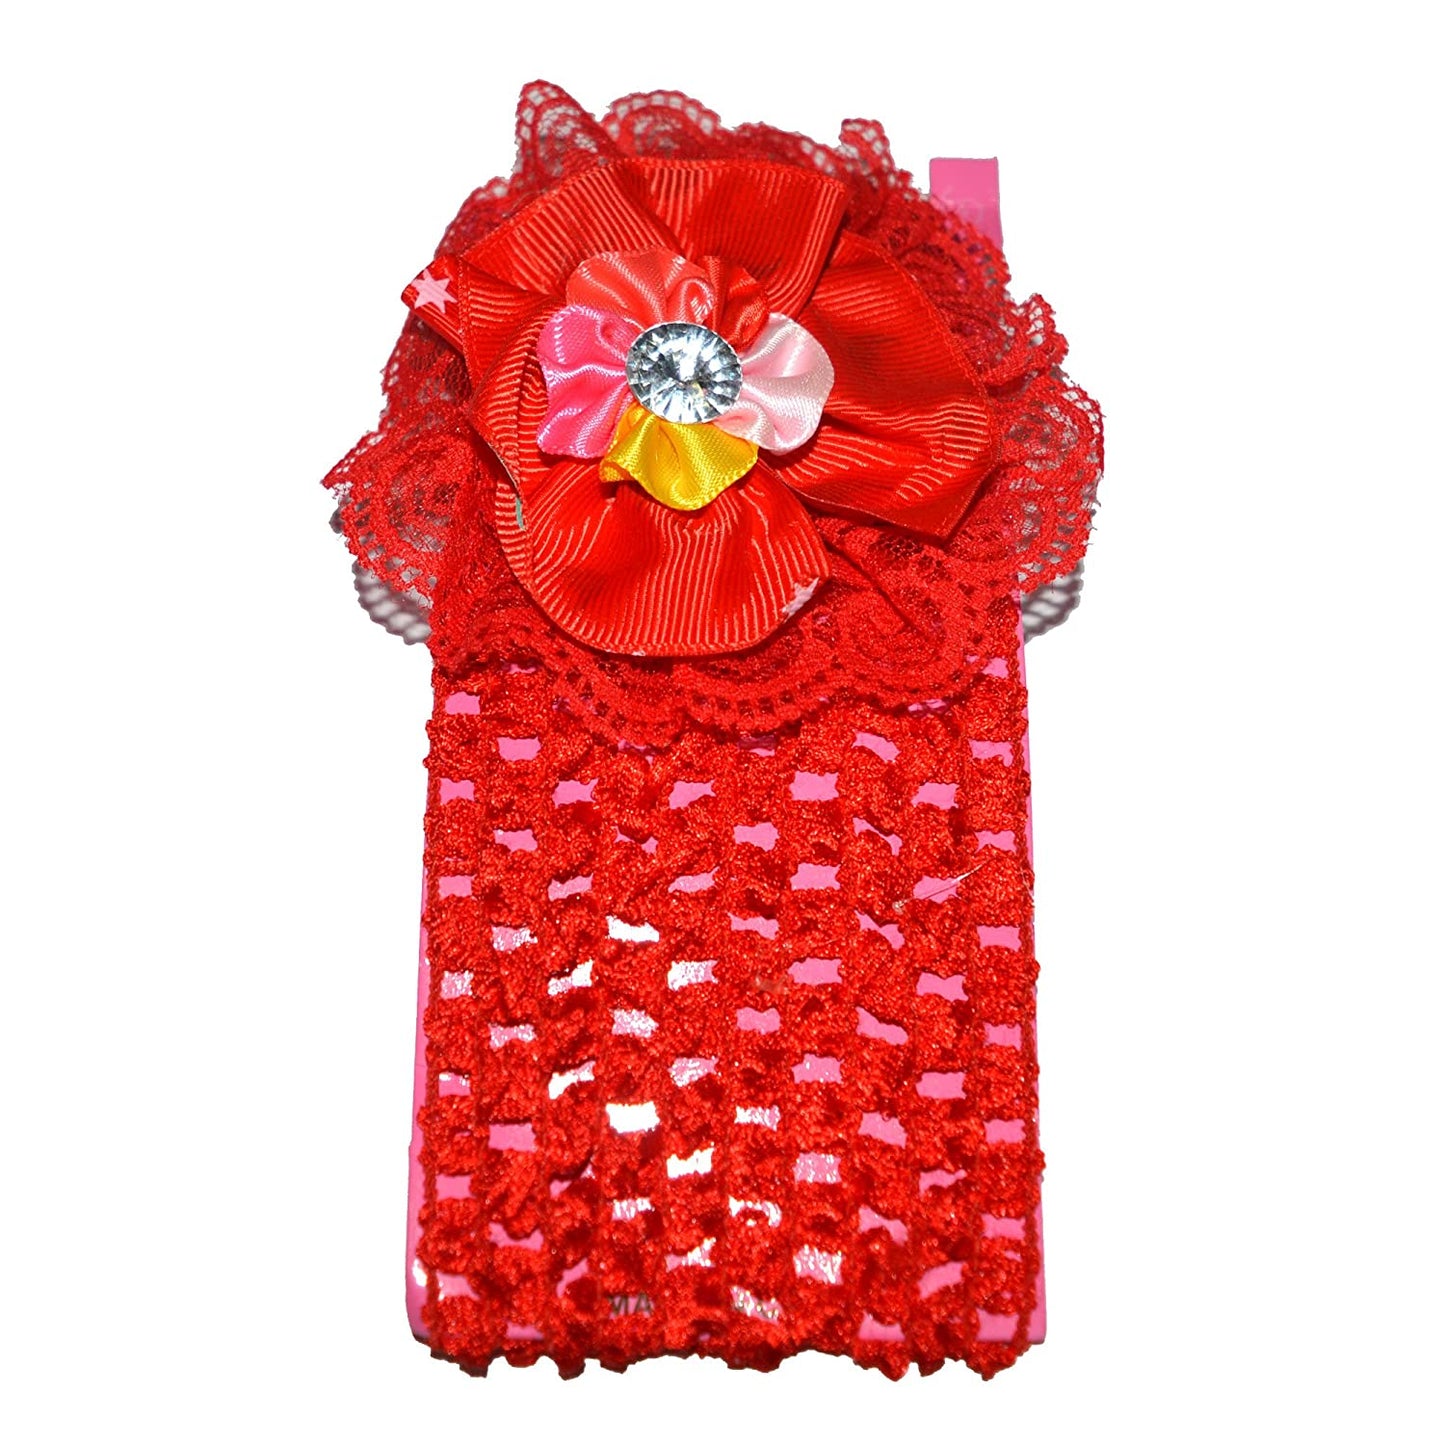 Floral Soft Stretchy Headbands for Baby Girls and Newborn (17-11 Red Baby Headband)